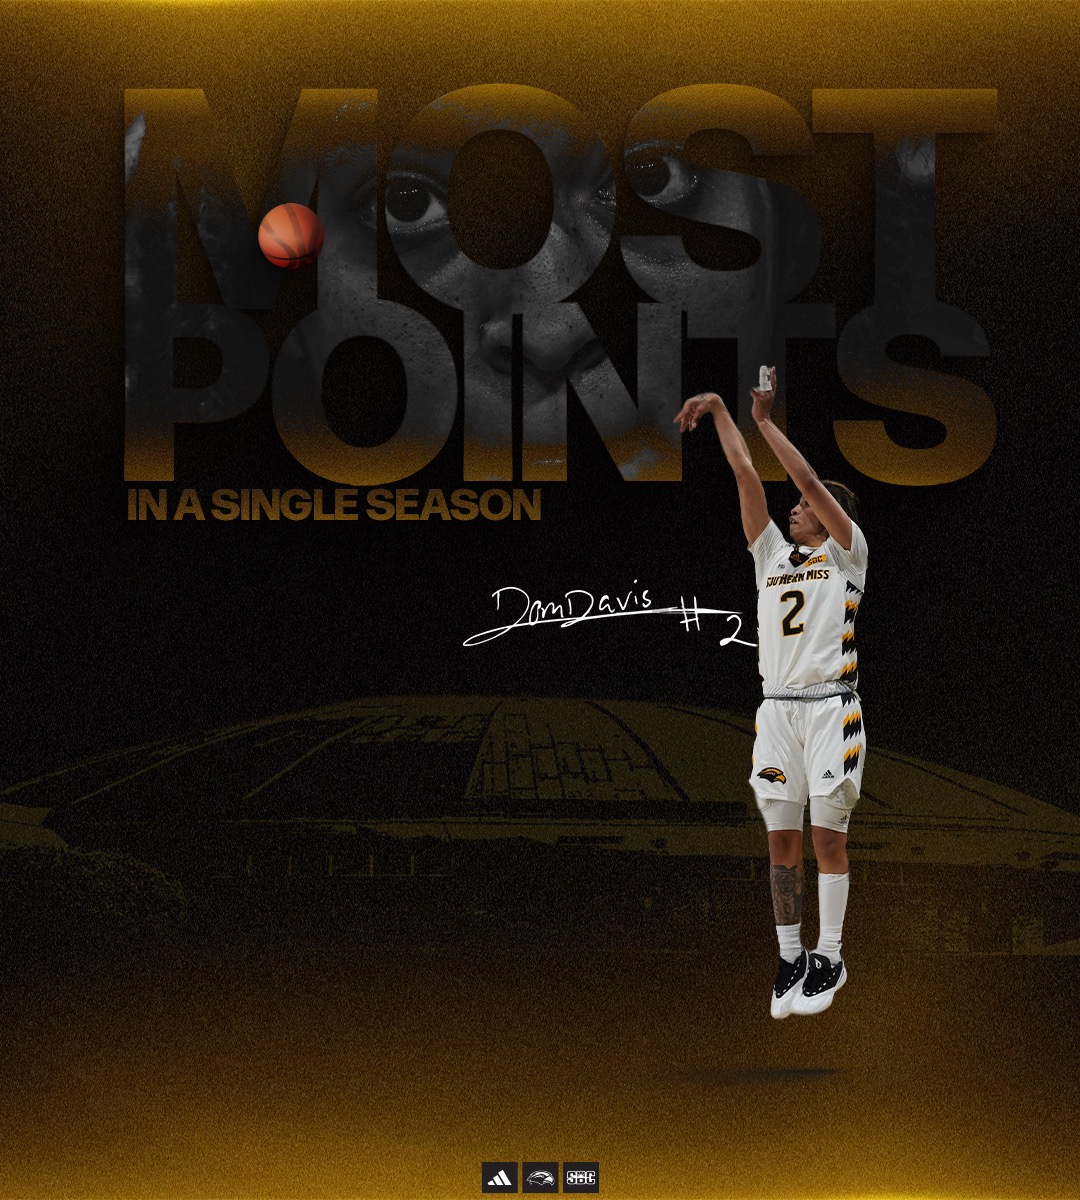 𝓱𝓮𝓻 @DomDiddy02 stands alone with the most points scored in a single season in program history. She passed Brittanny Dinkins and Portland McCaskill last night and now has 𝟔𝟓𝟏 points in 2023-24. #McNelisStrong | #SMTTT